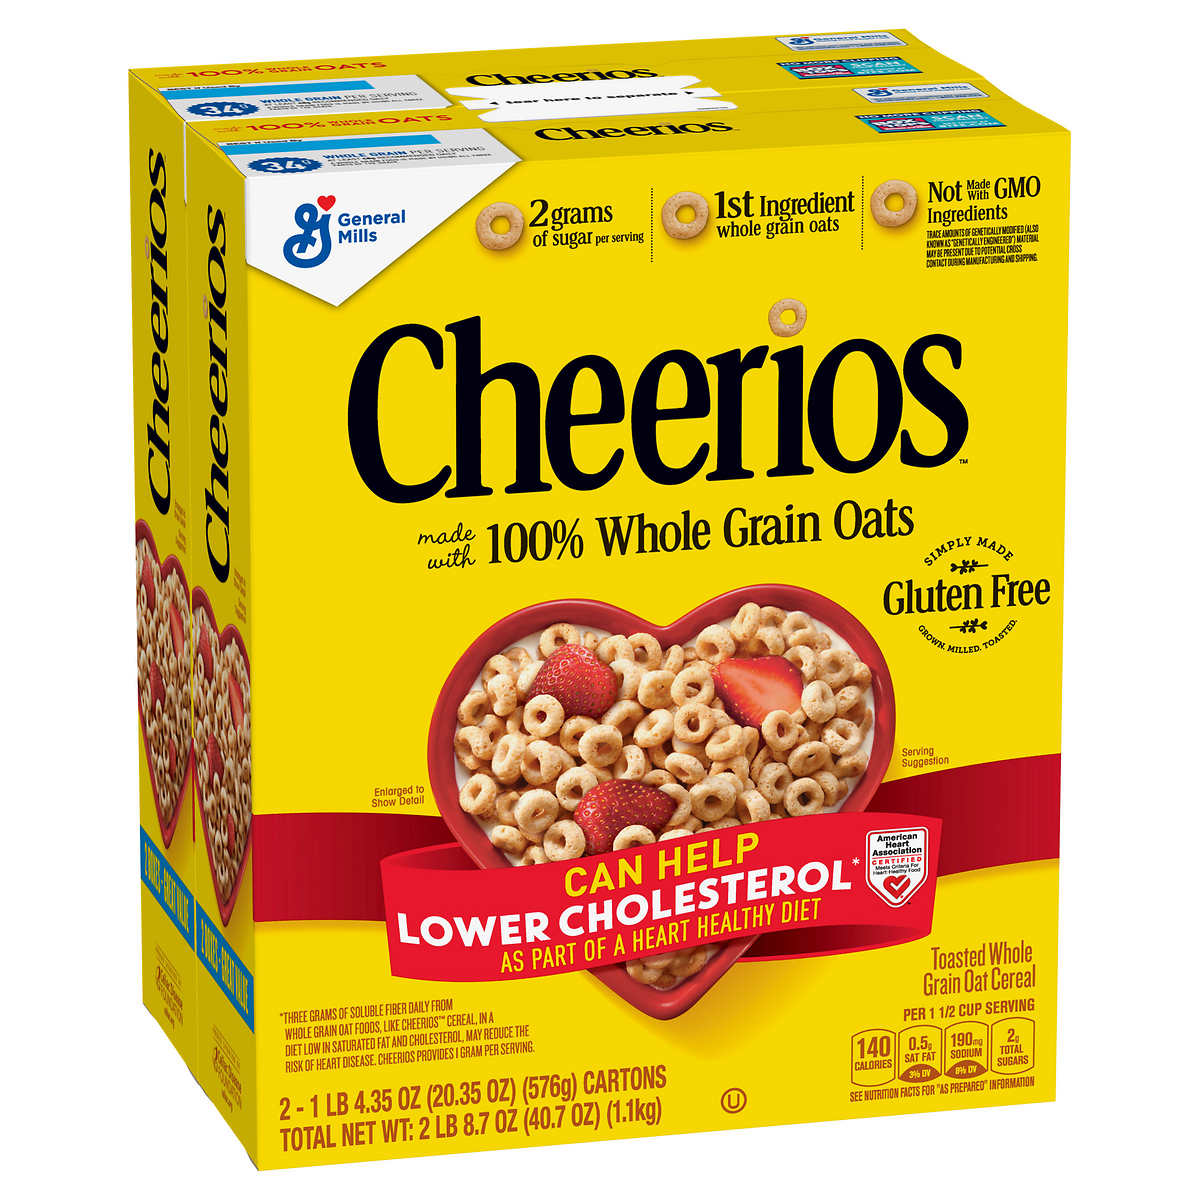 Is it Dairy Free General Mills Natural Flavored Honey Nut Cheerios, Cartons